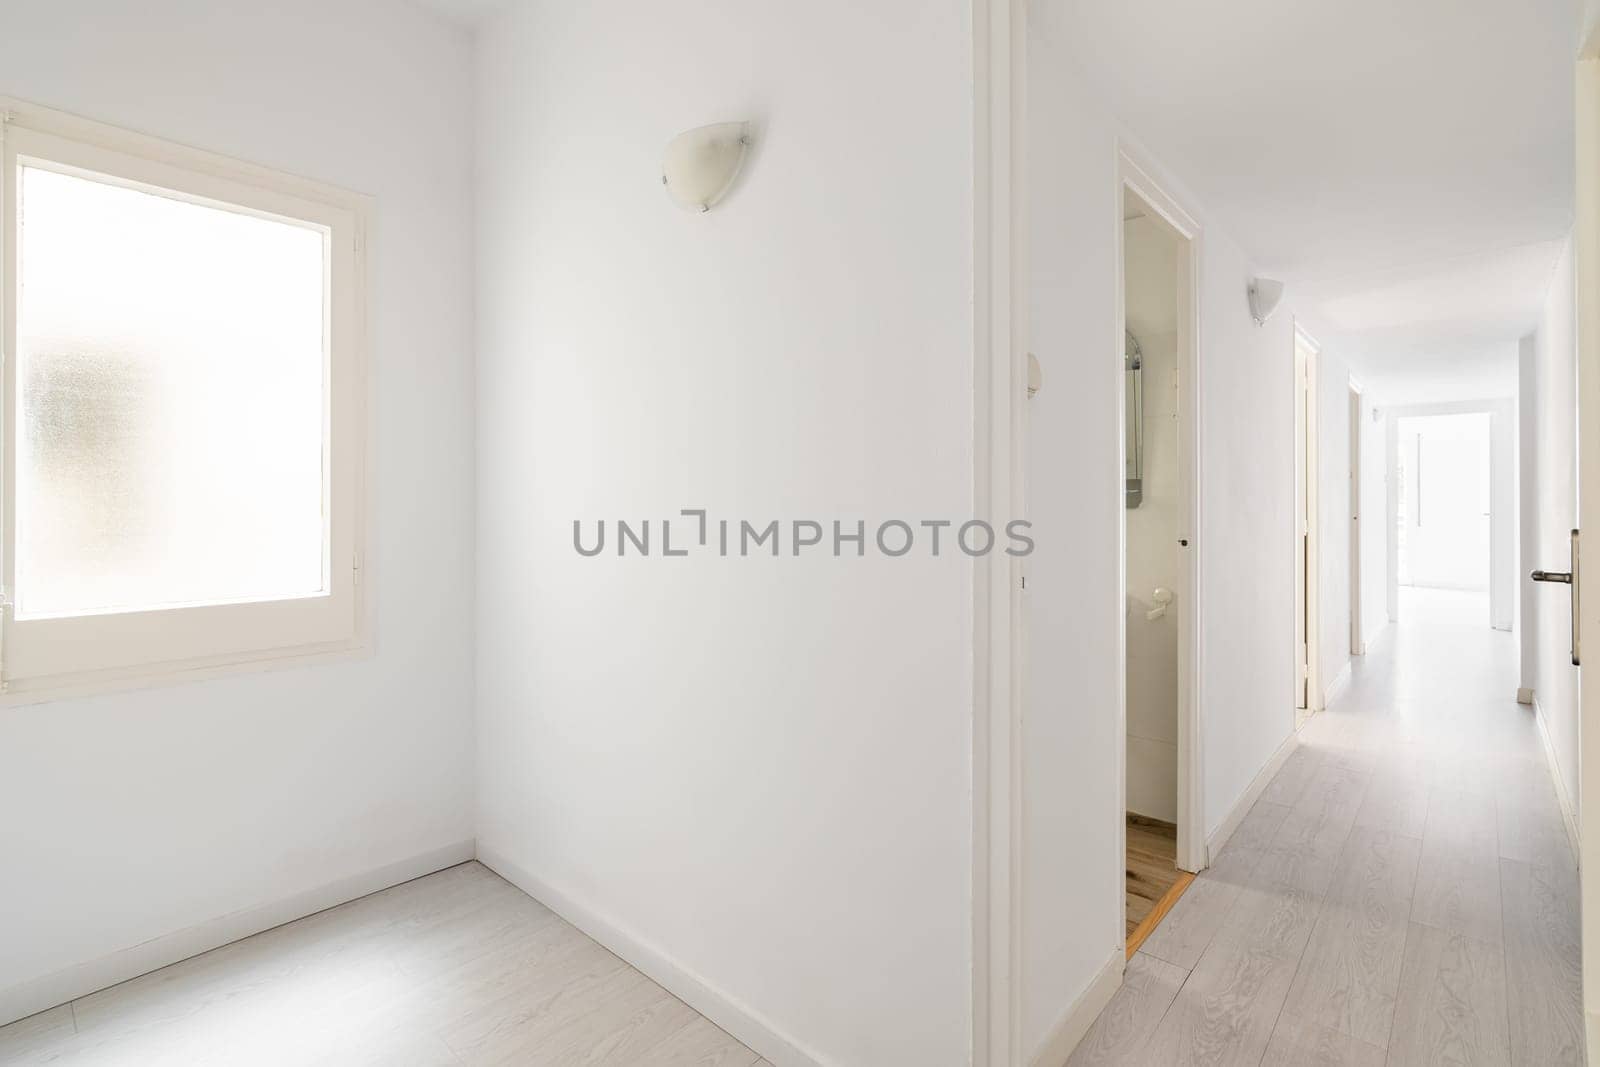 View from the entrance to new empty apartment after renovation in white tones with wooden floor. Cozy apartment in new building with modern minimalist design from the developer by apavlin